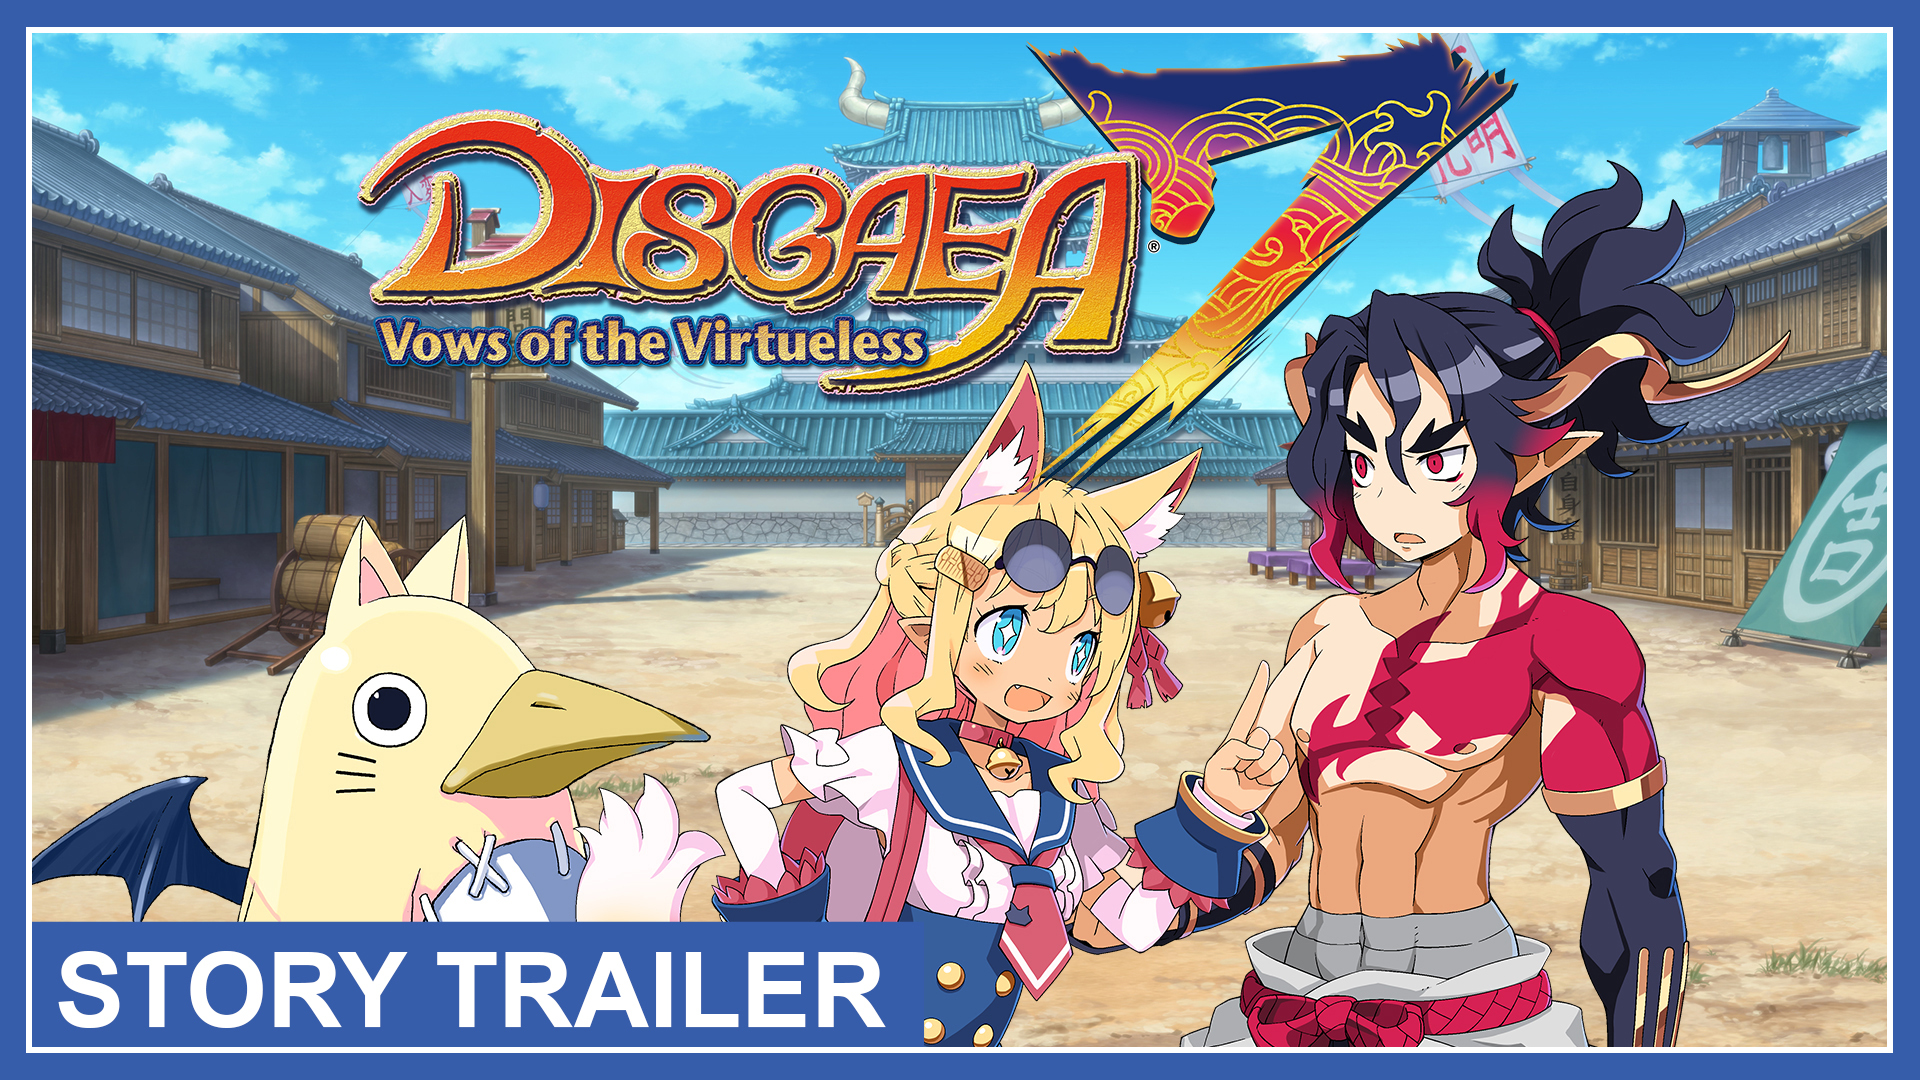 Disgaea 7 Vows of the Virtueless - Story Trailer